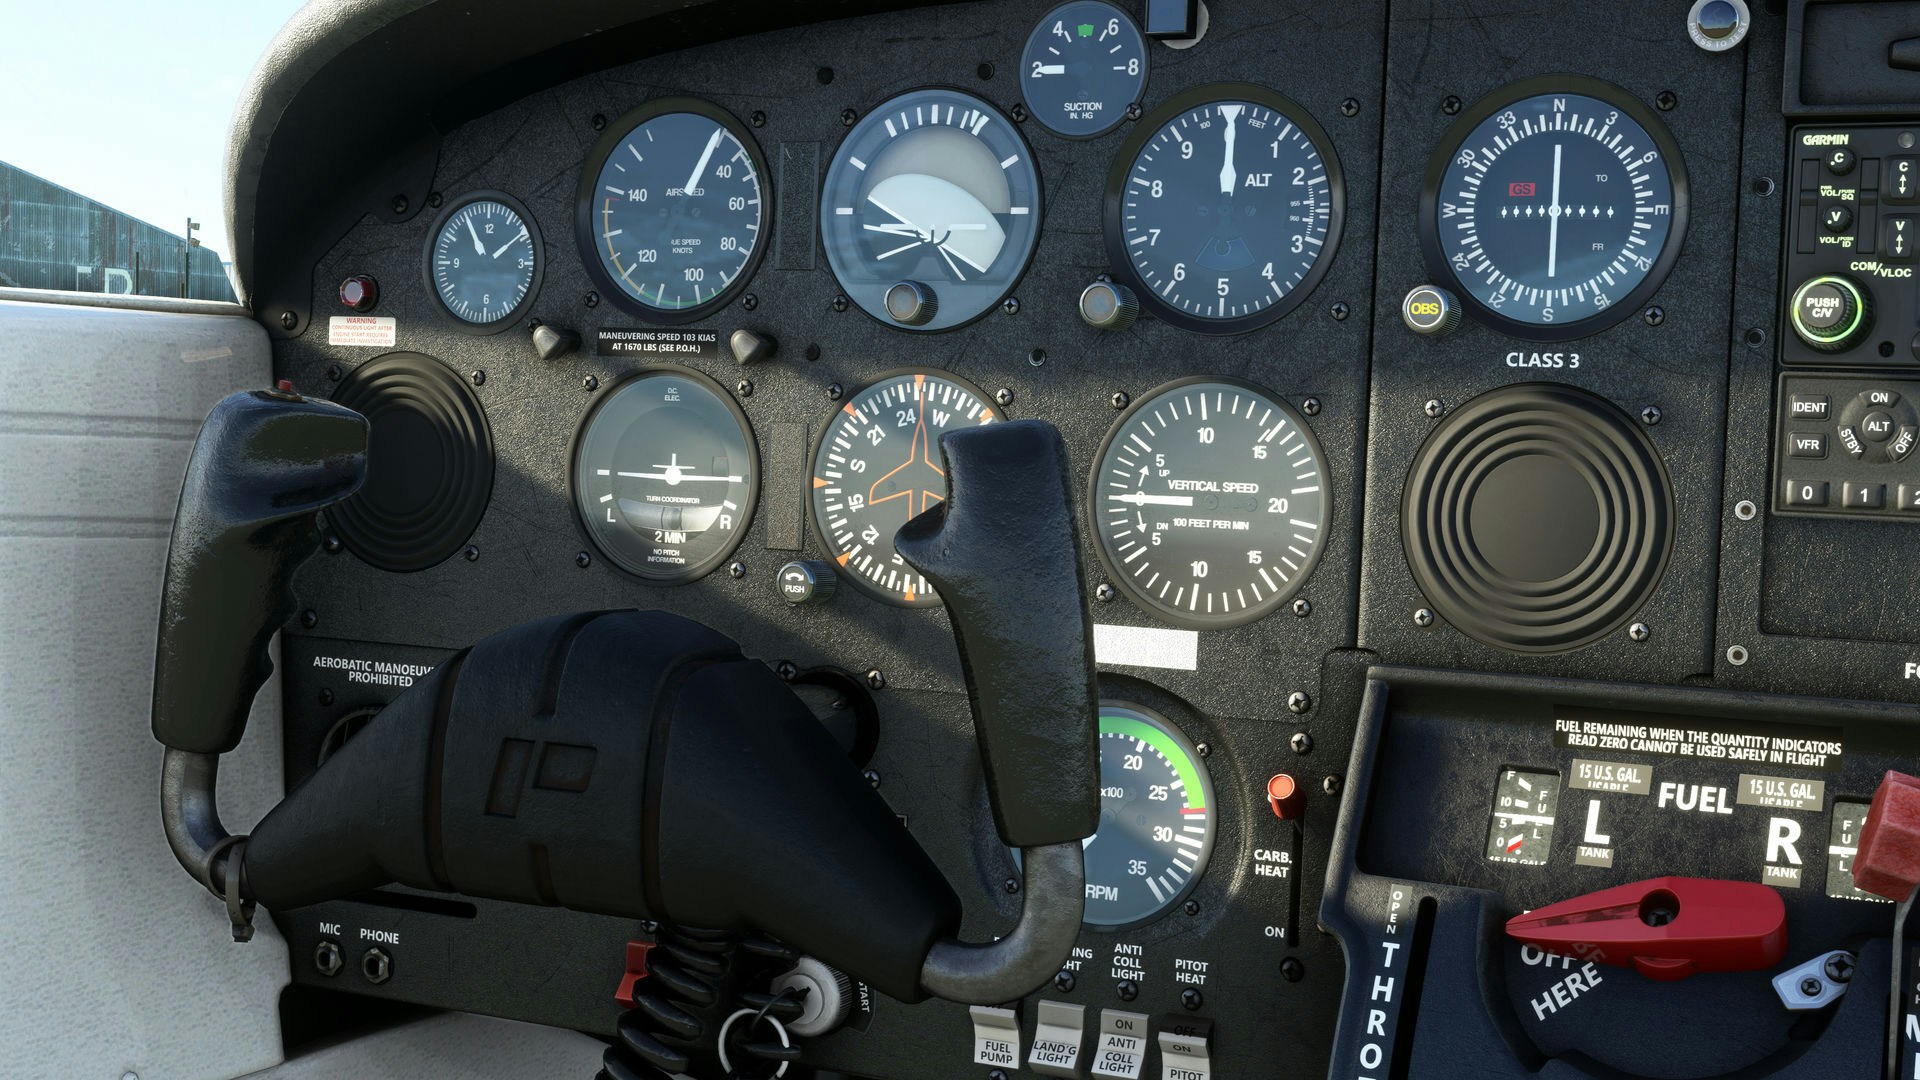 Just Flight Shares Development Update on the PA-38